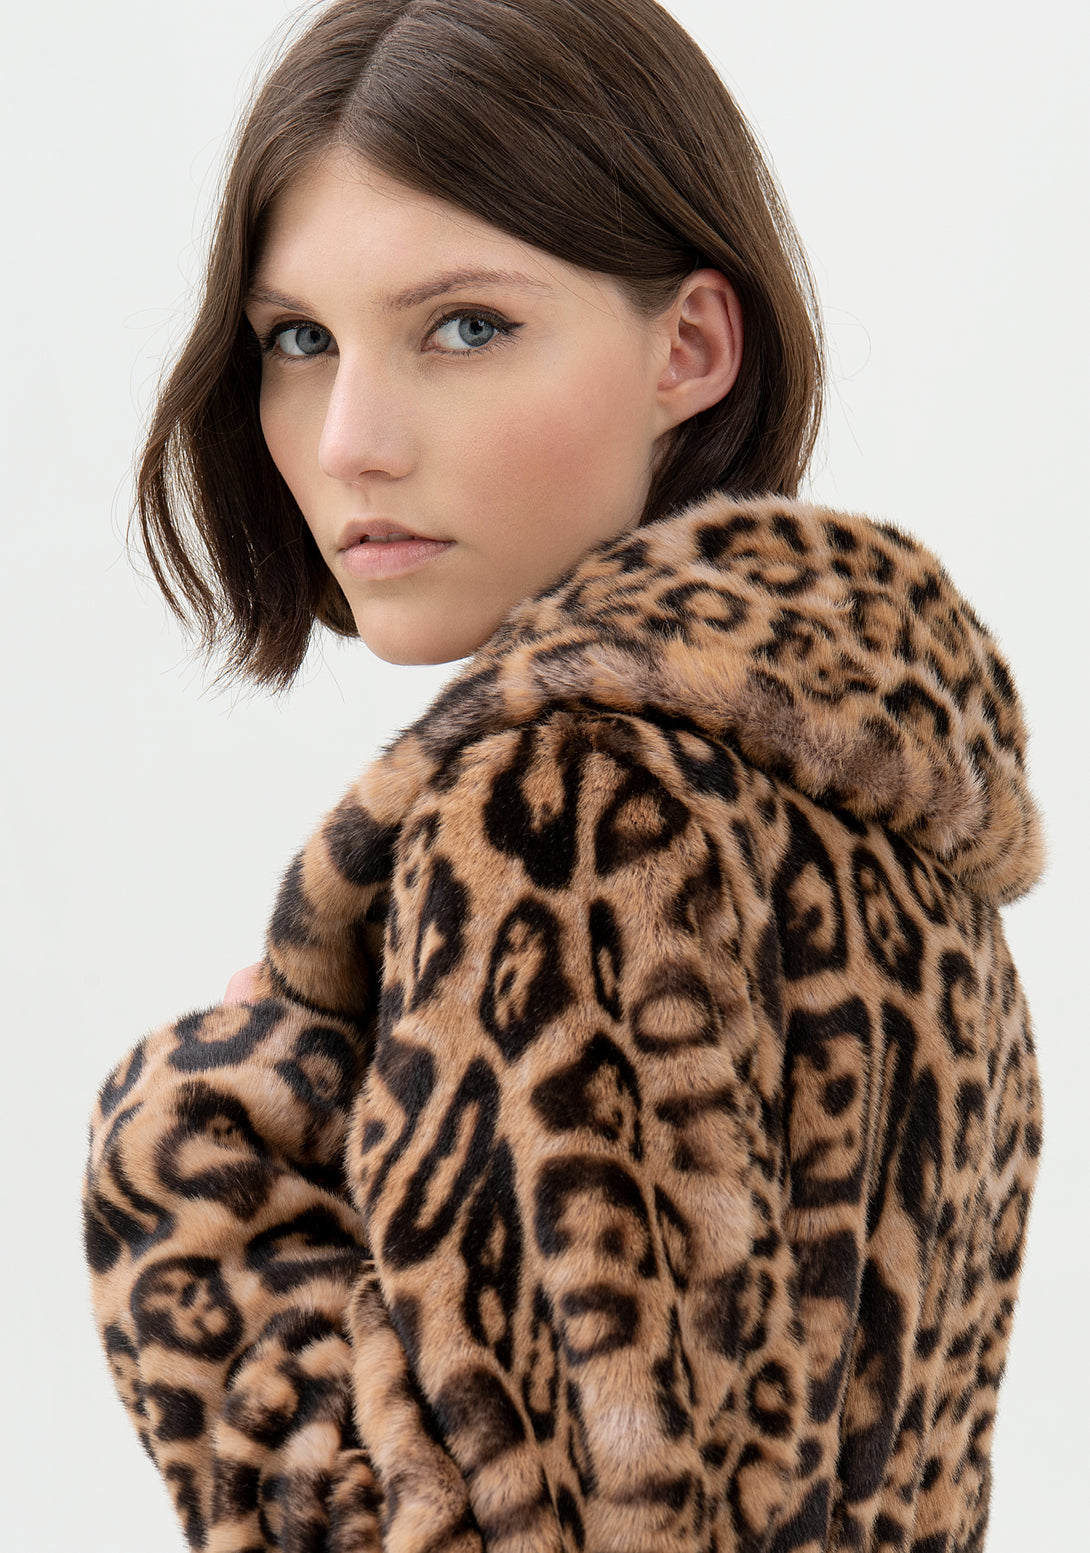 Coat wide fit, long, made in eco fur with animalier pattern